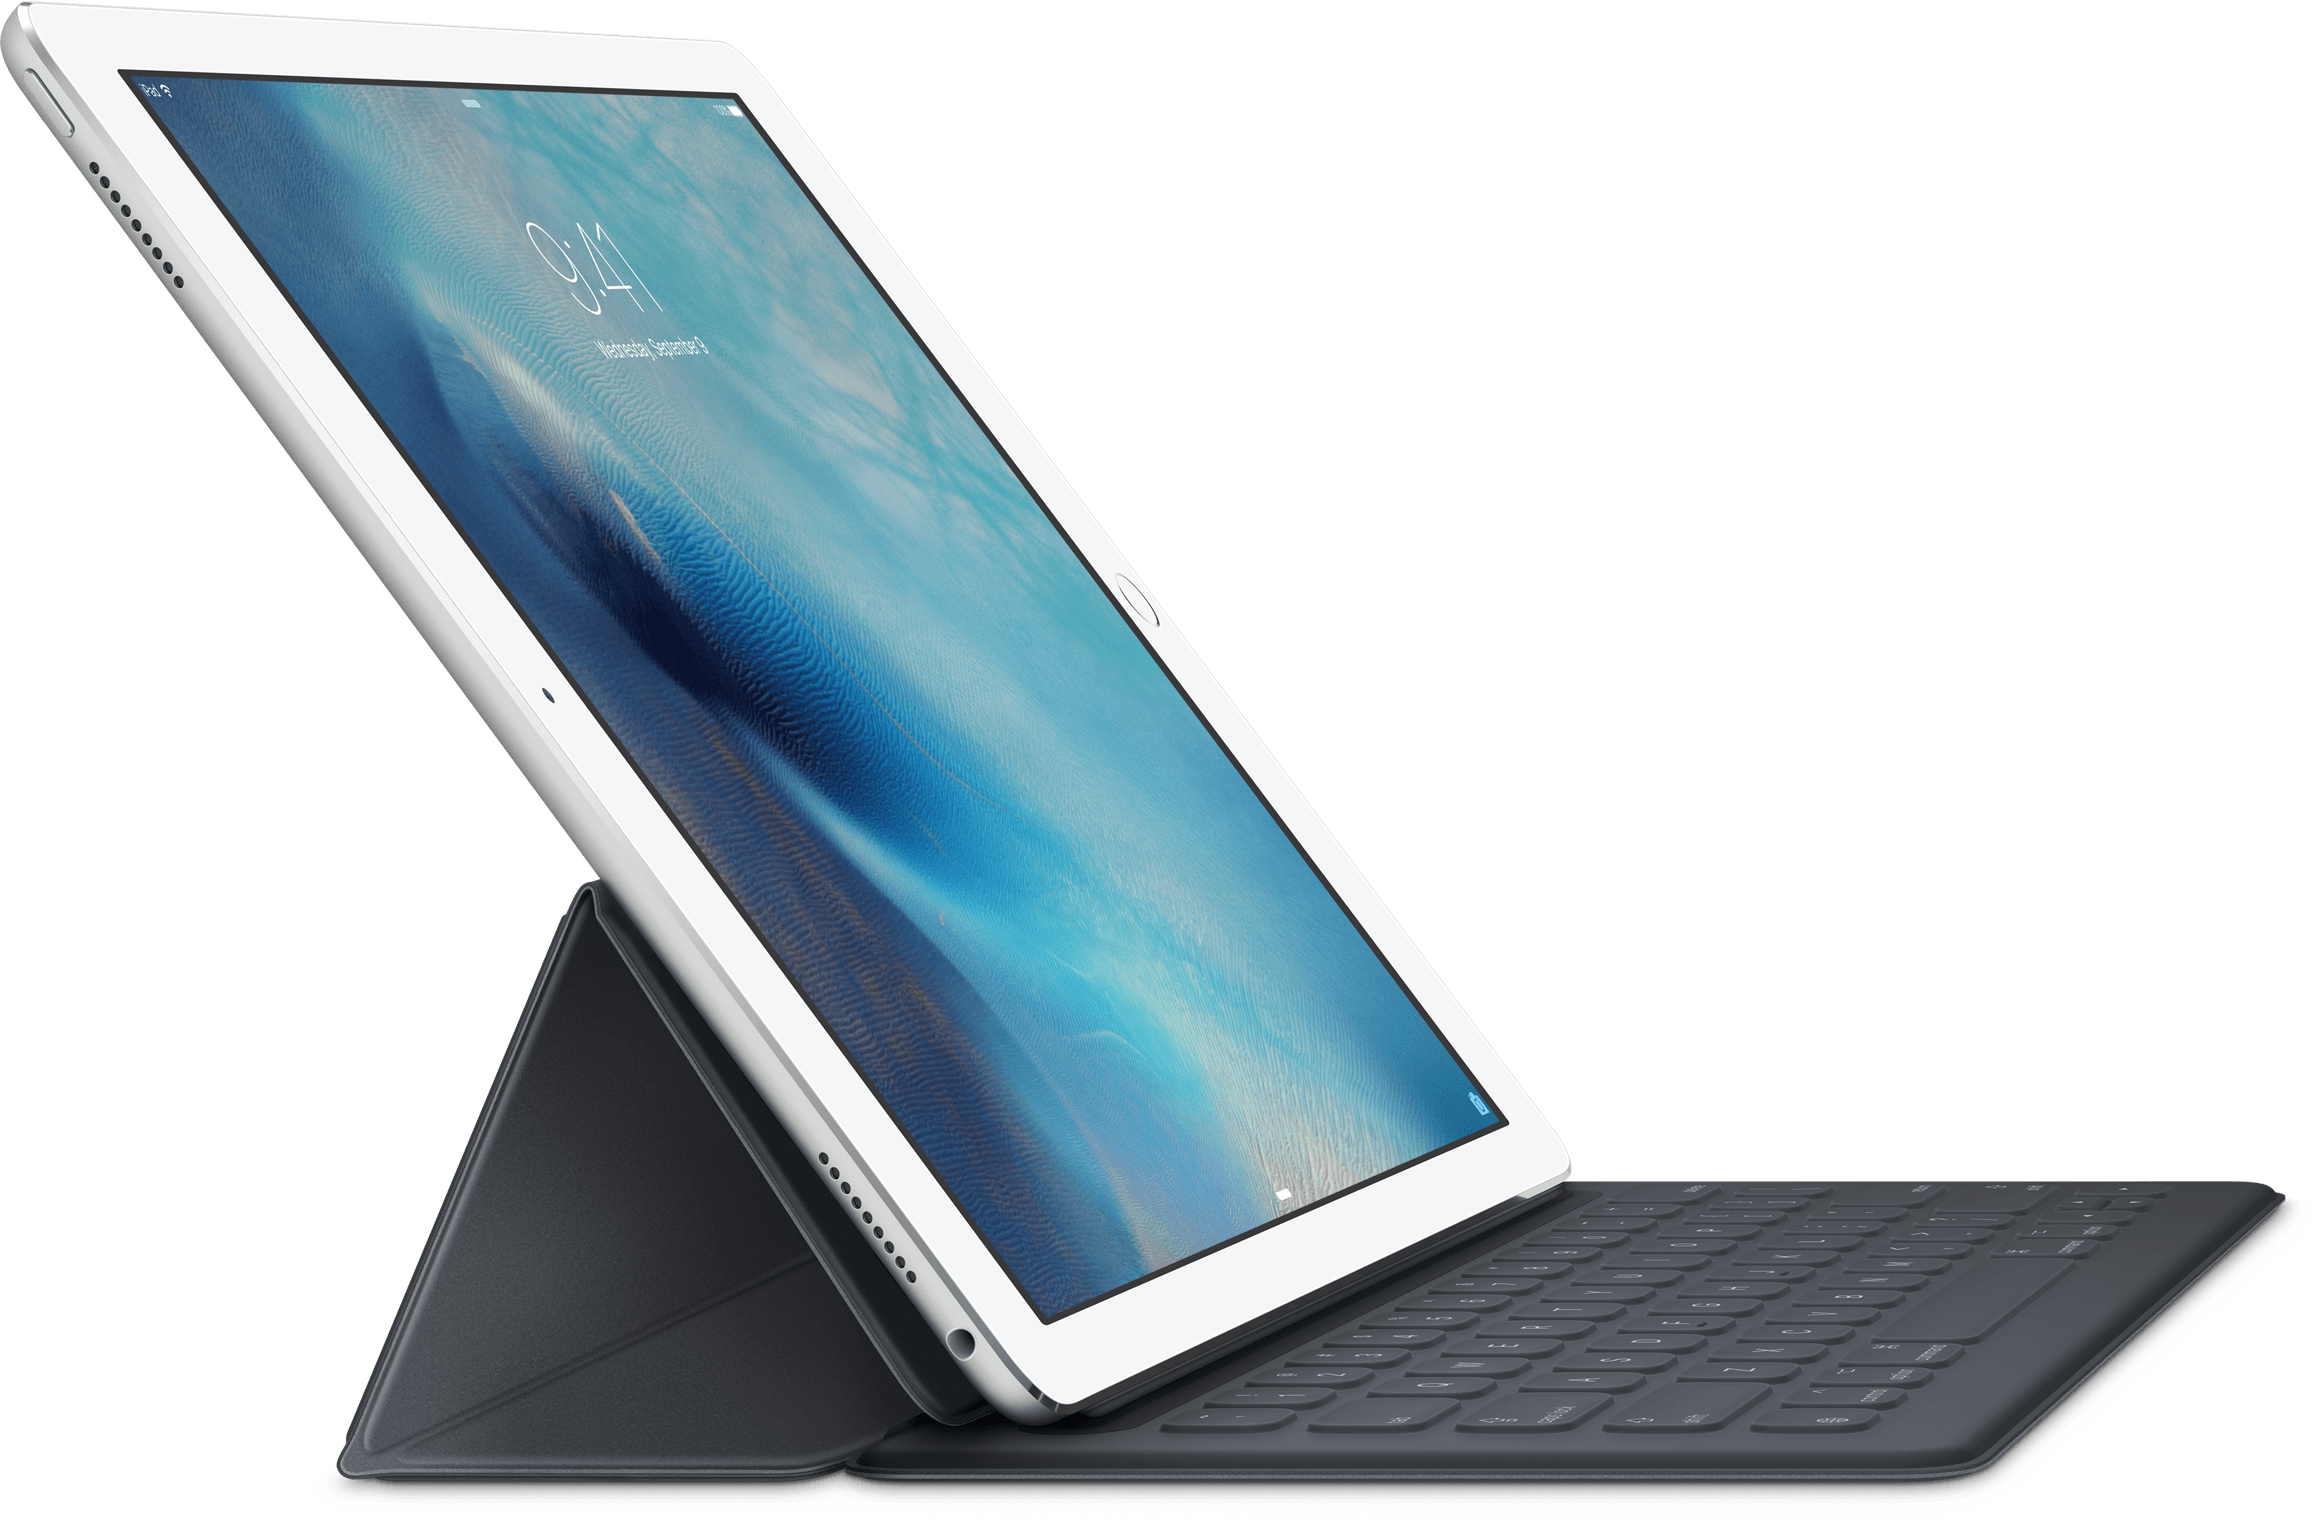 Can iPad Pro really replace your Mac? We discuss (and argue), on The